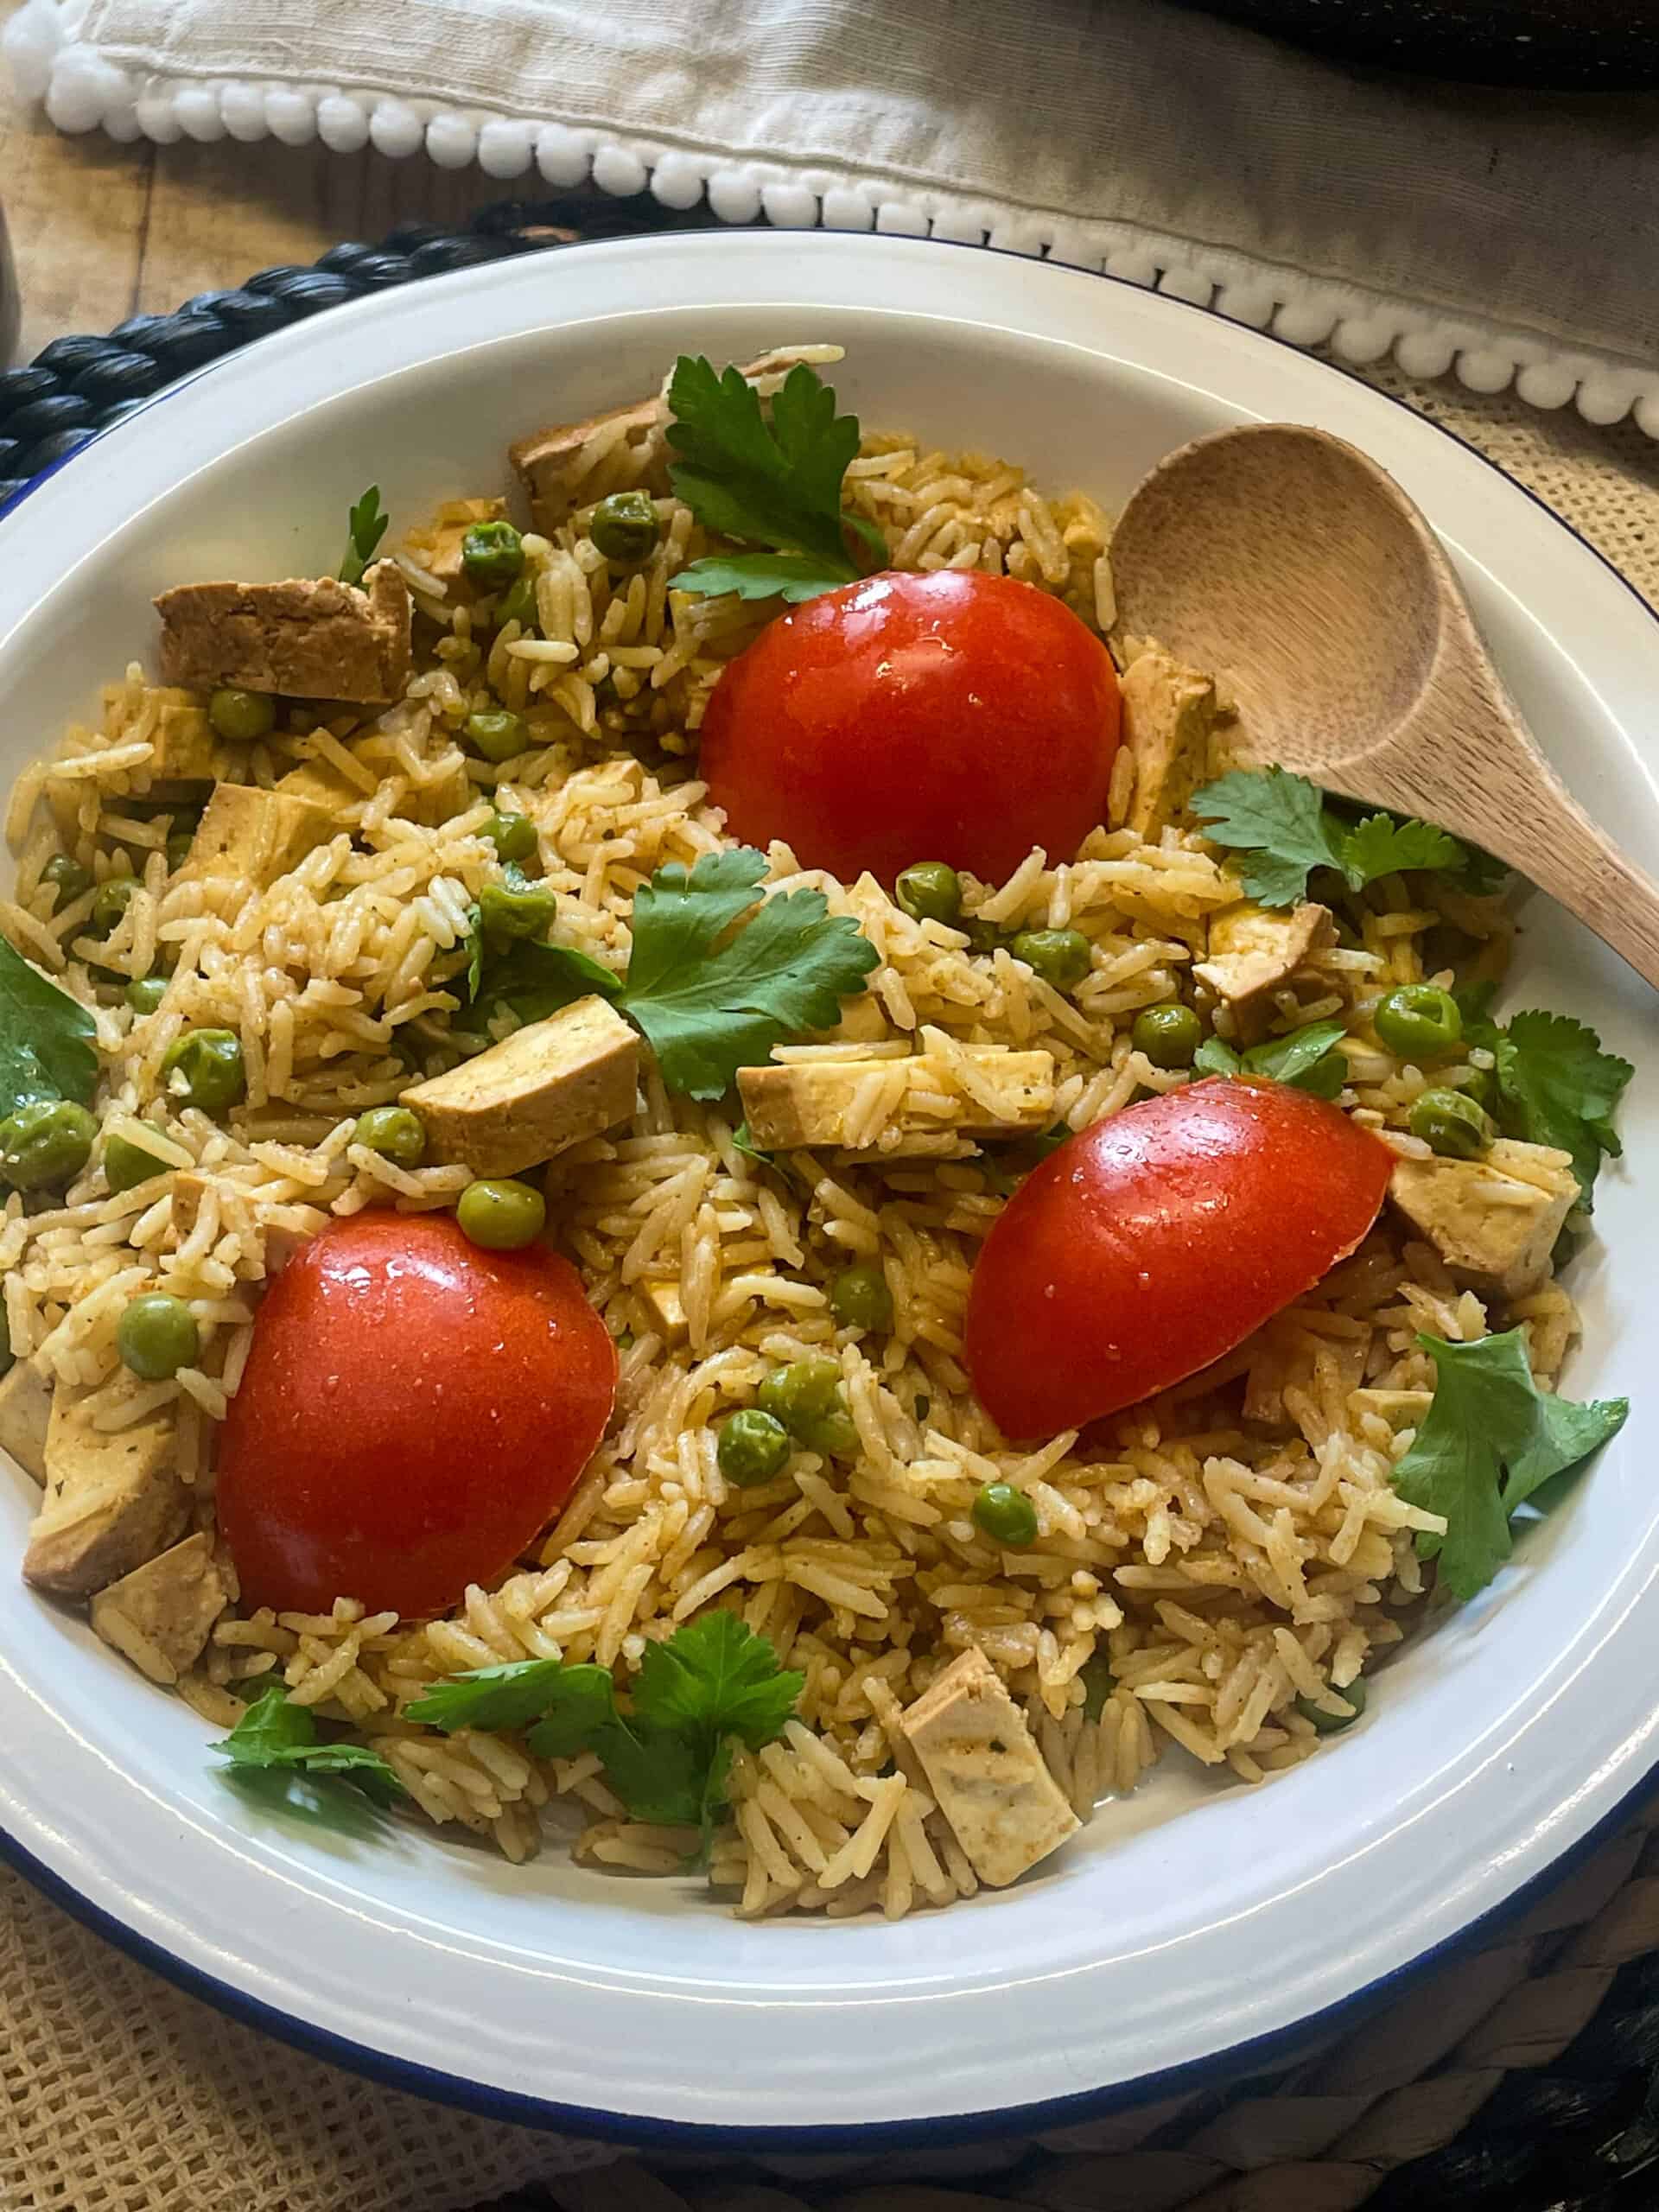 vegan smoked tofu kedgeree rice and tomatoes with coriander, in a bowl with small wooden spoon.